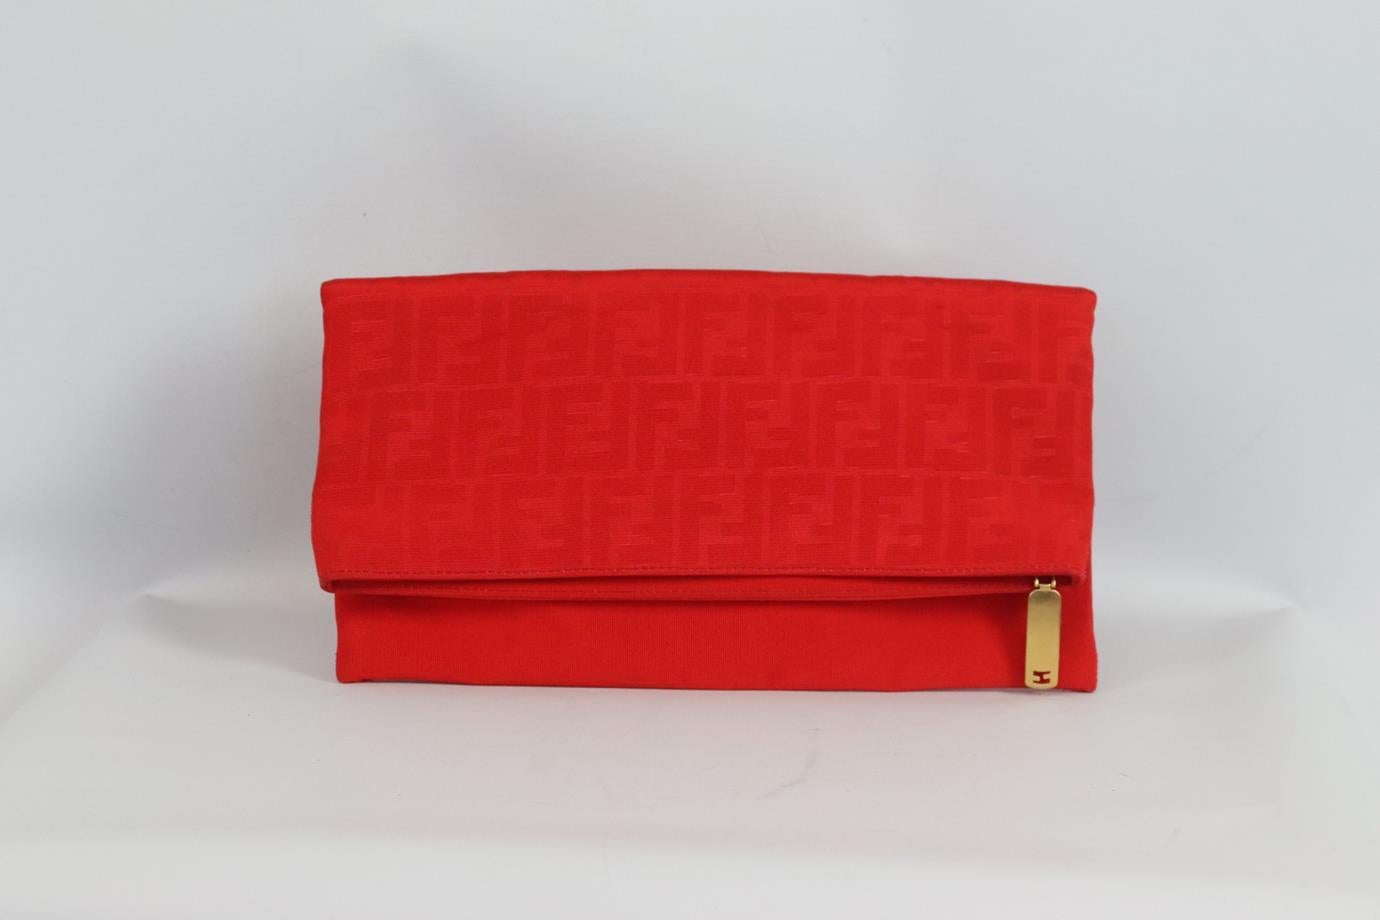 Fendi Chameleon ff jacquard grosgrain clutch. Made from durable red grosgrain with the brand’s iconic ff jacquard, it has a large internal compartment and fold over silhouette. Red. Zip fastening at top. Comes with dustbag. Height: 7.25in. Width: